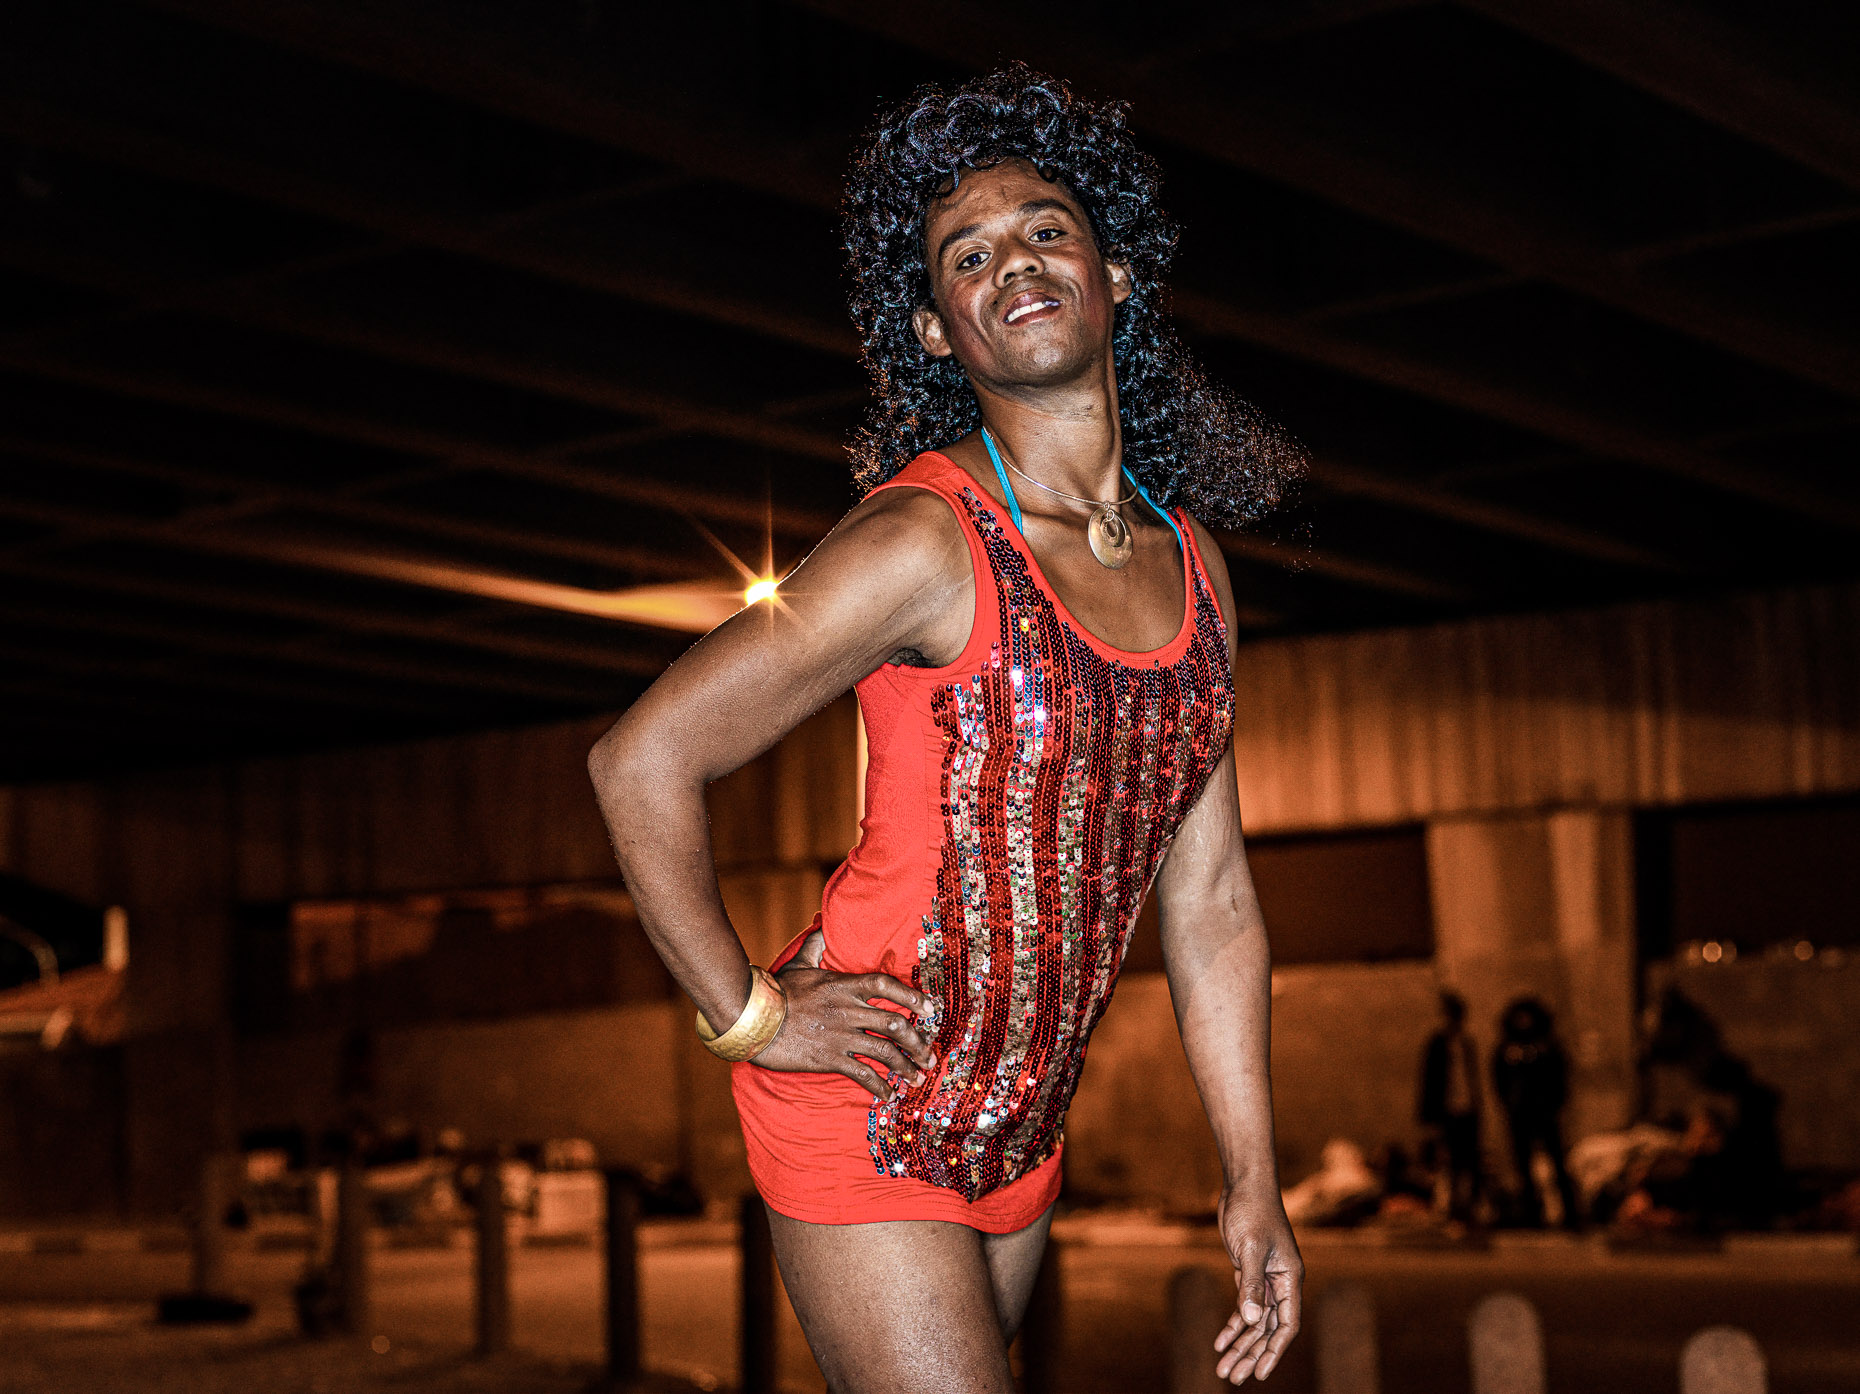 A trans woman dressed in a red mini dress,  posing to have her portrait taken.